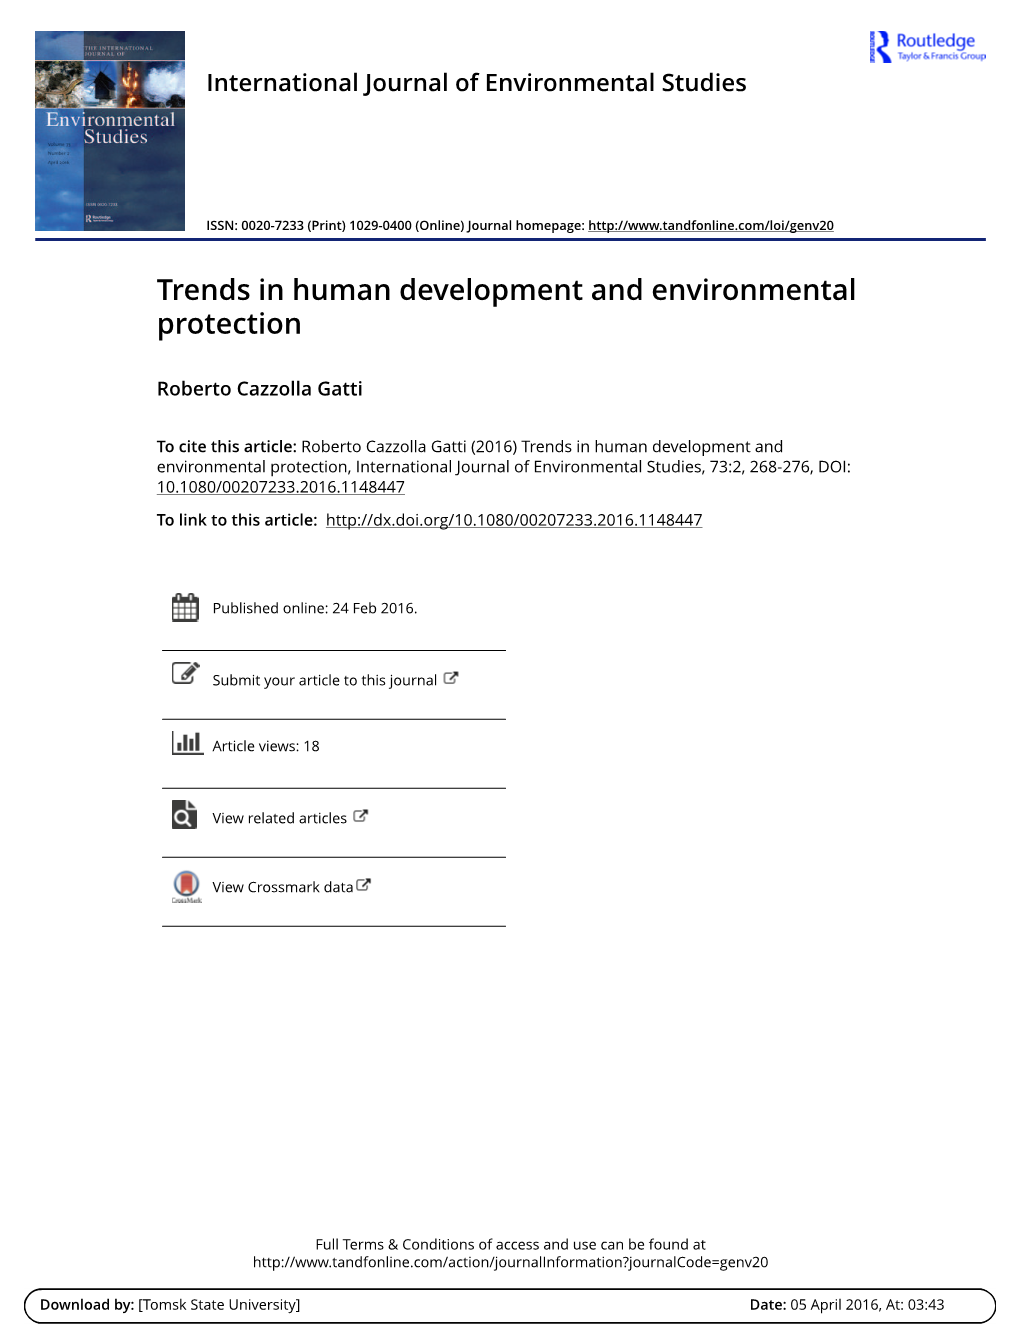 Trends in Human Development and Environmental Protection